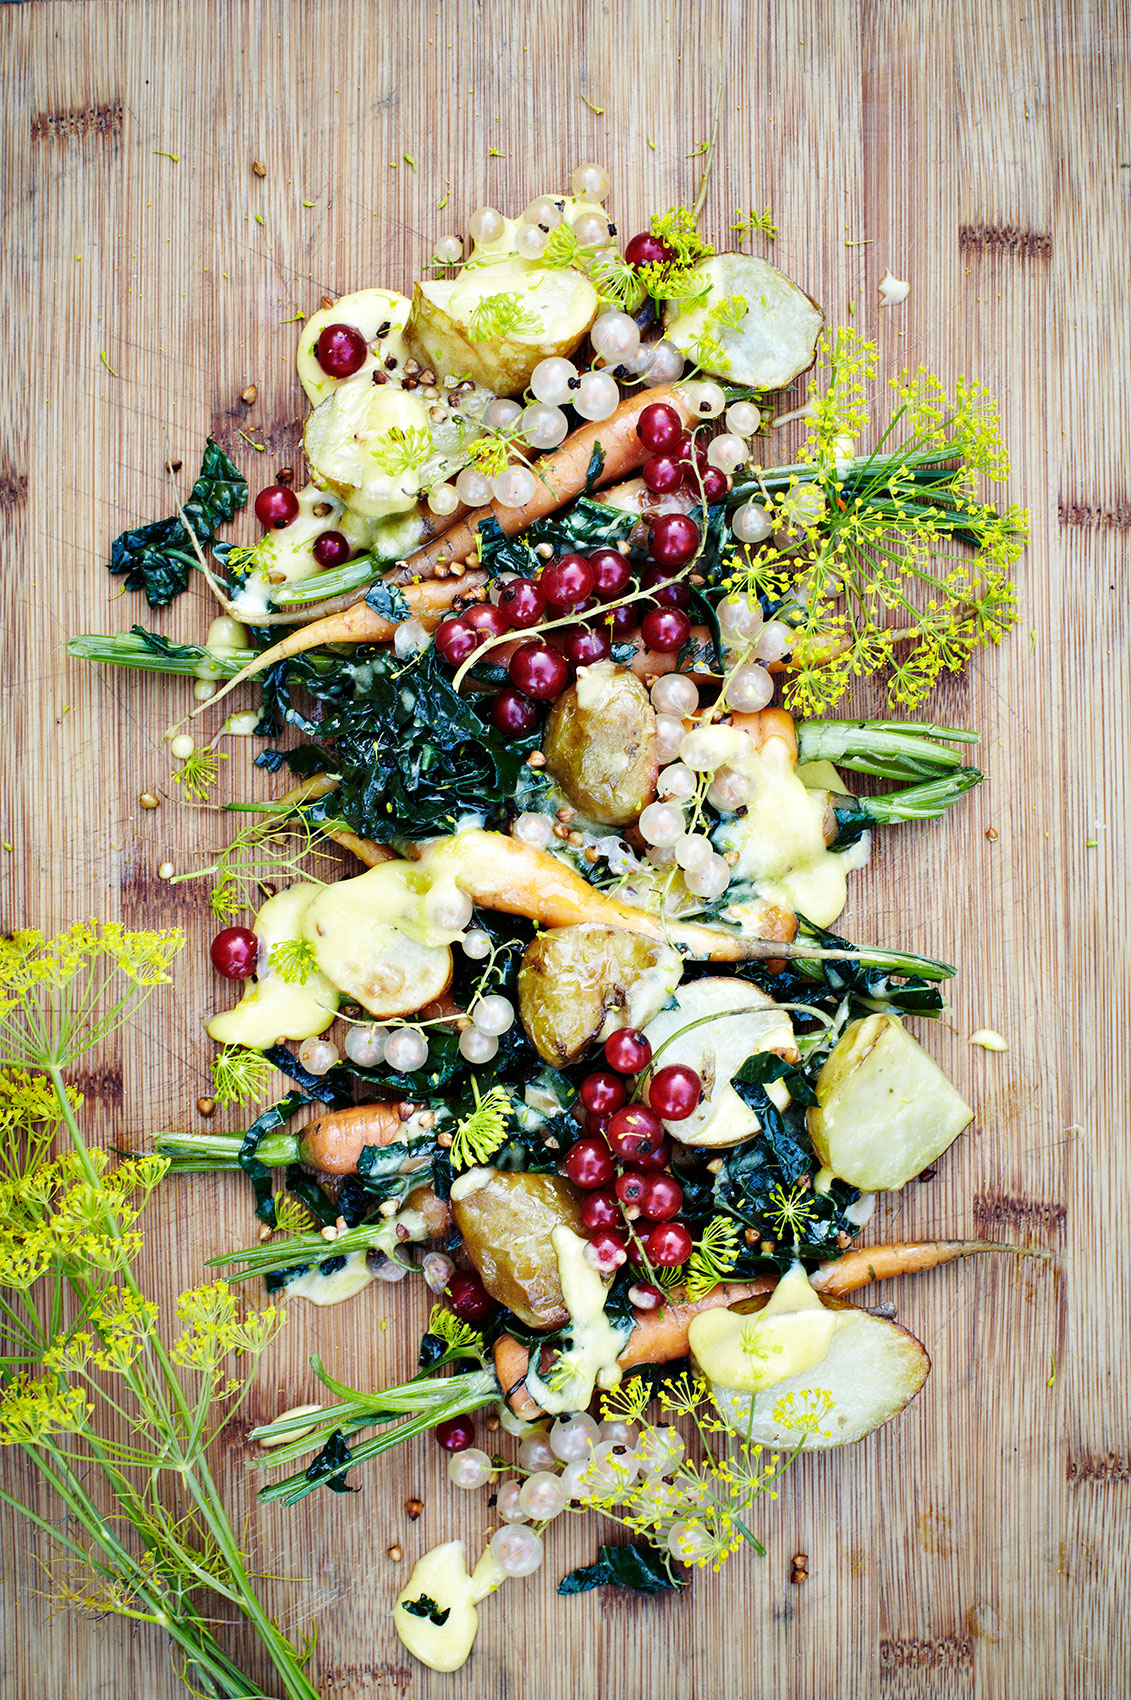 Stedsans in the Woods • Potato & Carrot Salad with Berries & Wild Flowers • Lifestyle & Editorial Food Photography